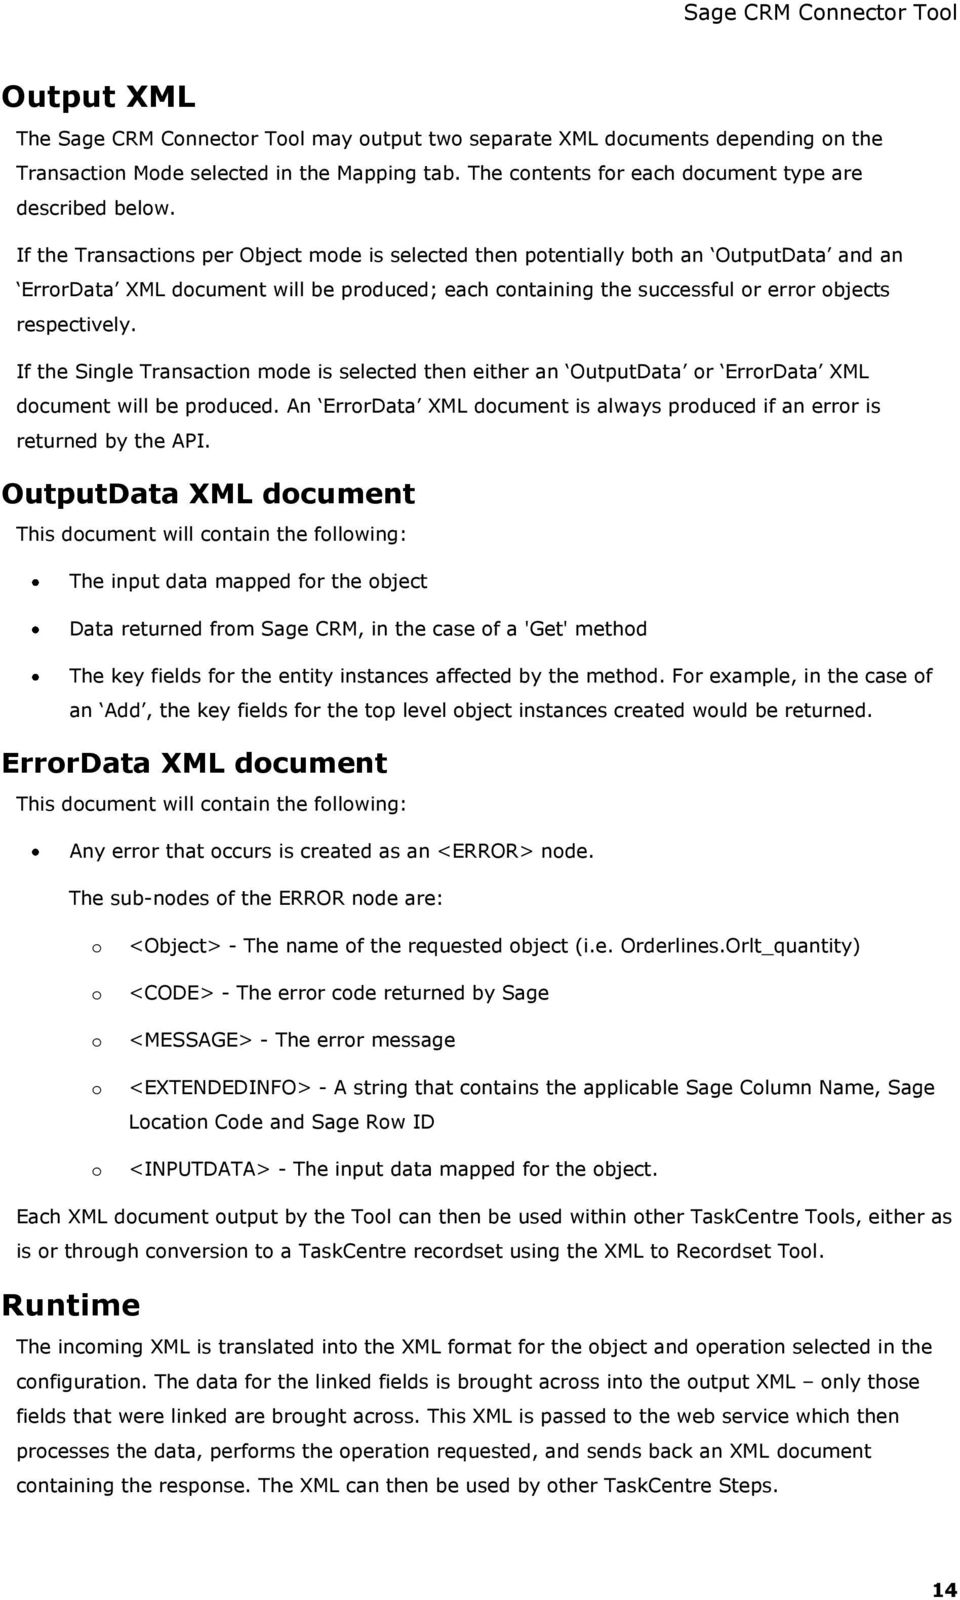 If the Single Transaction mode is selected then either an OutputData or ErrorData XML document will be produced. An ErrorData XML document is always produced if an error is returned by the API.